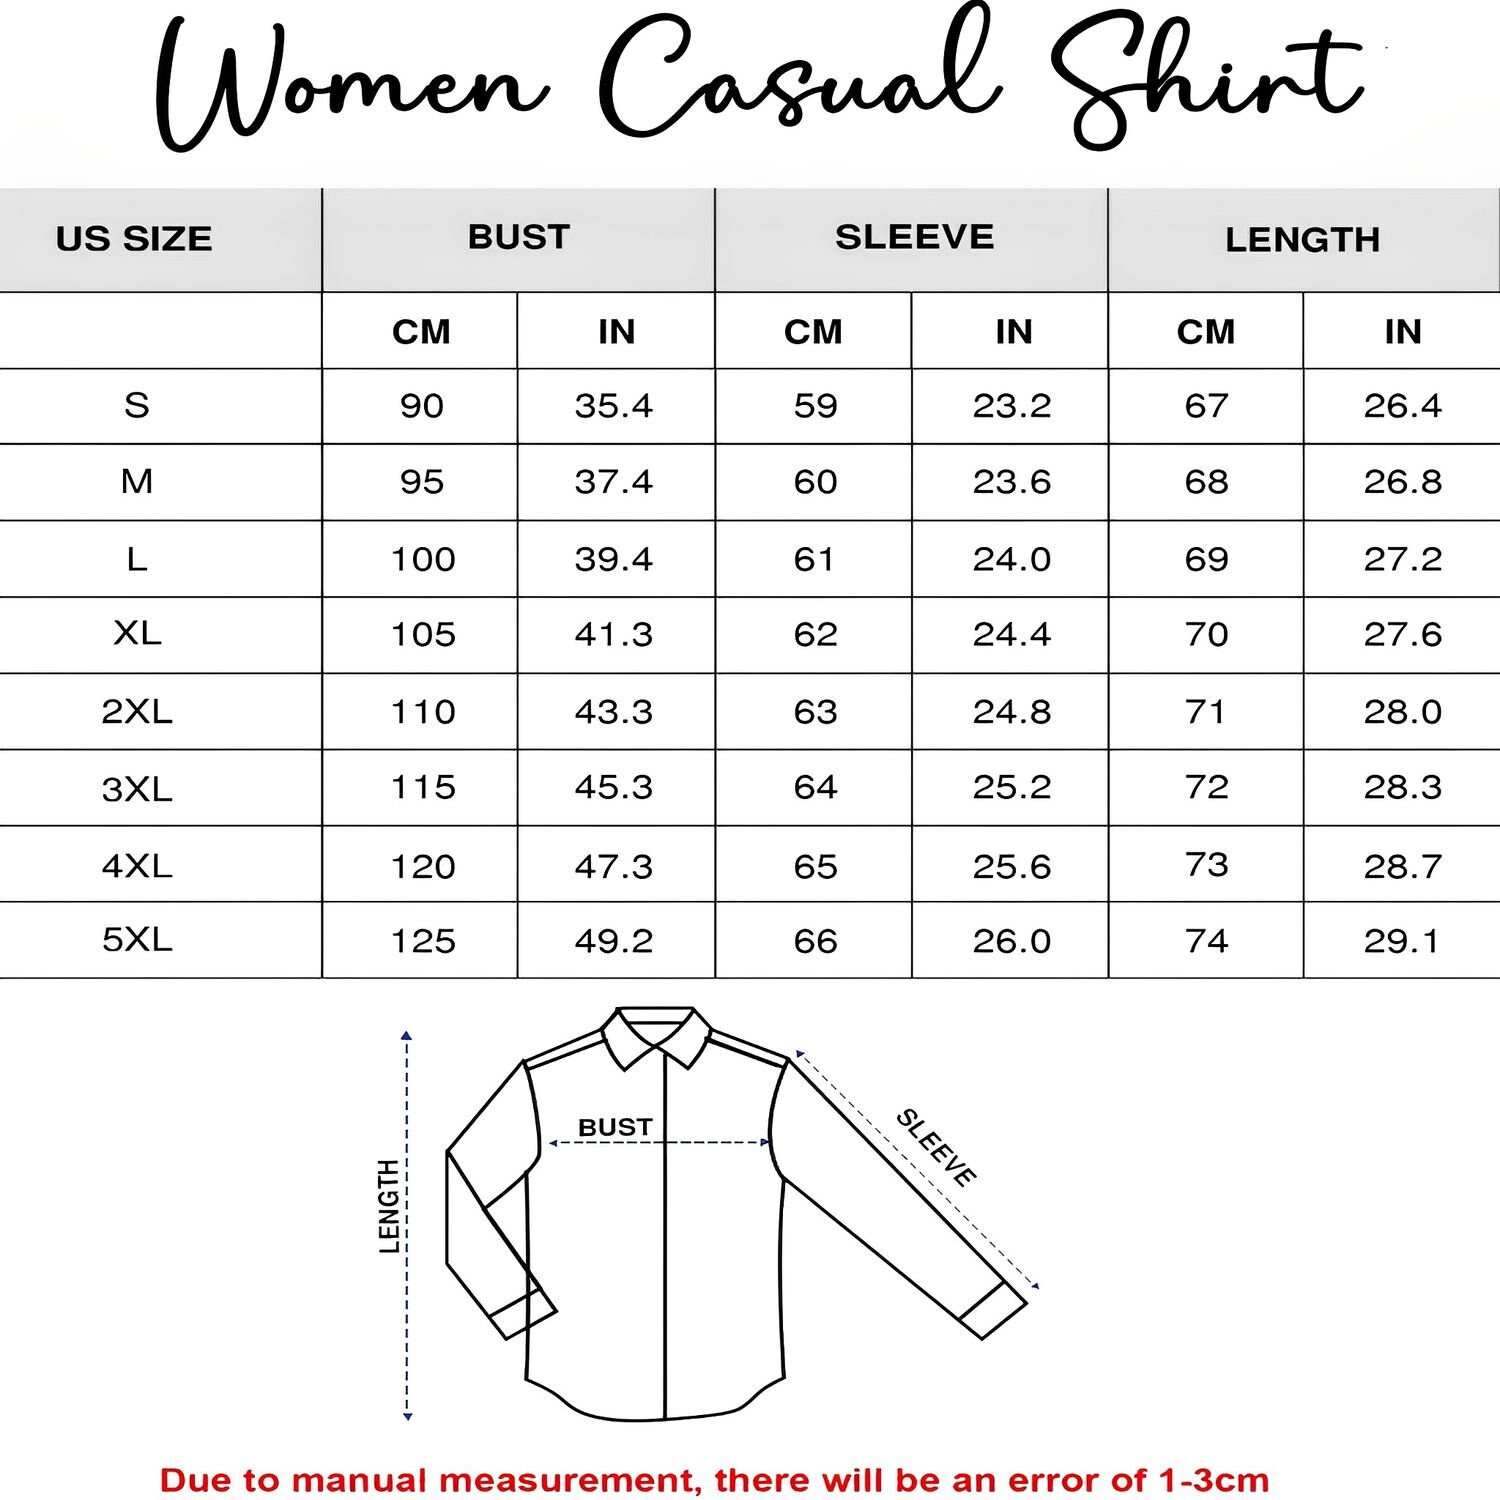 The Simpsons Family Women Casual Shirt, The Simpsons Shirt, The Simpsons Woman Shirt